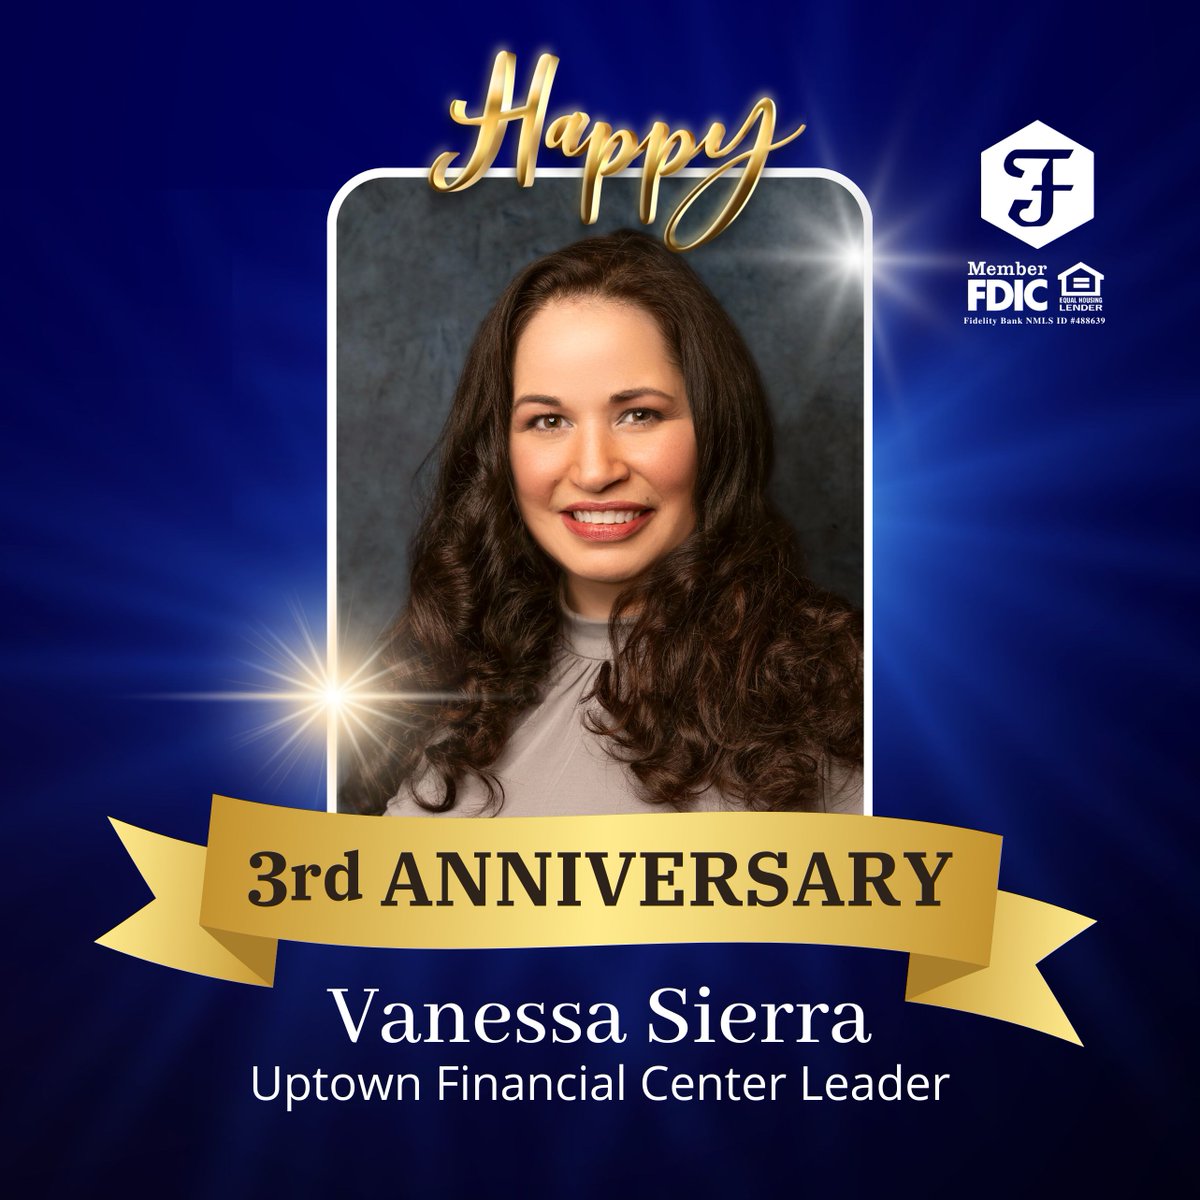 fidelitybankLA: 🎉 Happy Anniversary! 🎈
Join us in wishing a Happy 3rd Anniversary to #FidelityBankLA Uptown Financial Center Leader, Vanessa Sierra. Thank you for all that you do for the #FidelityFam, Vanessa! 🎊#HereForGood